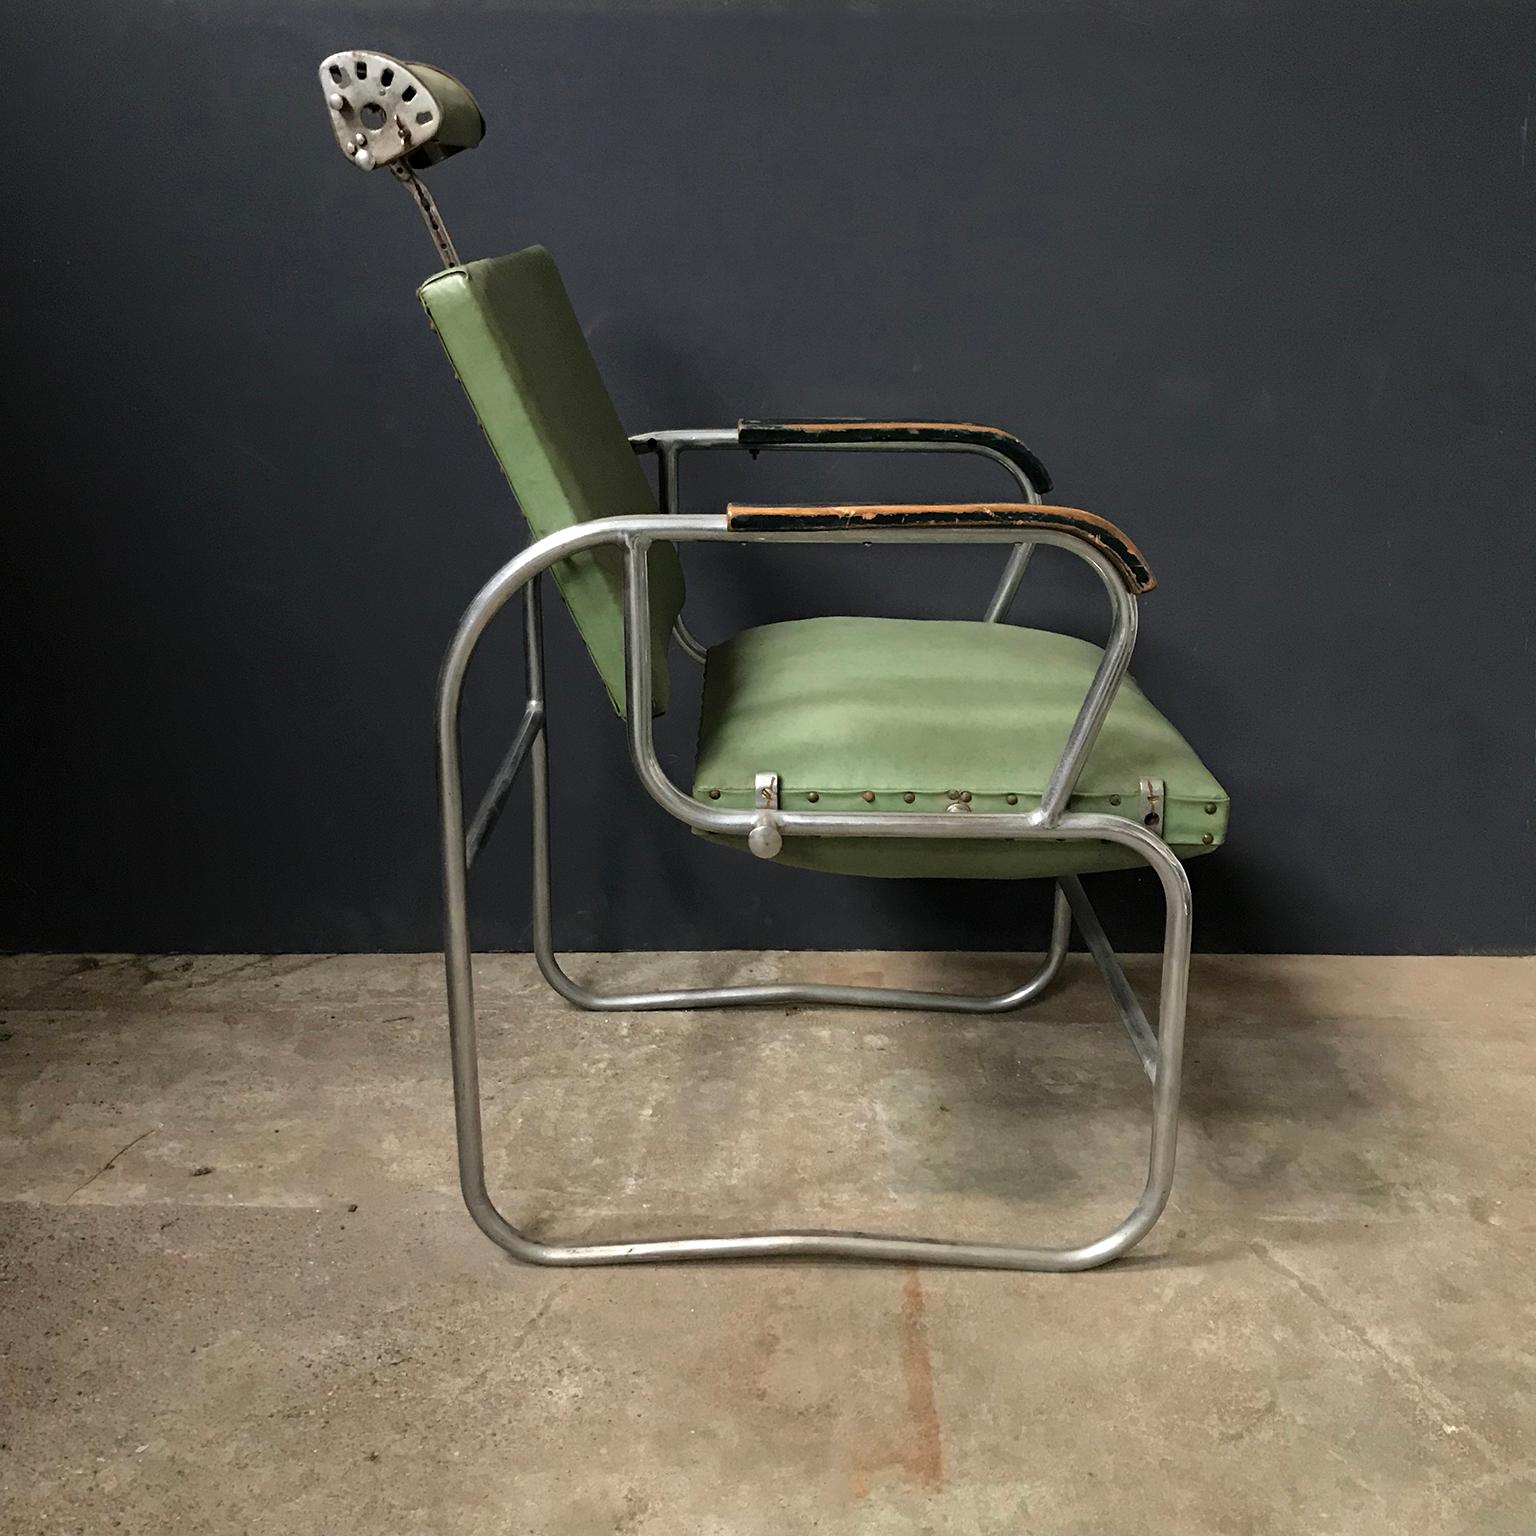 Barber chair. This beautiful authentic chair has many interesting details. The headrest is adjustable in height and angle as well as the angle of the backrest is adjustable. The seat can be rotated and fixed 180'C (360'C). The chair shows traces of